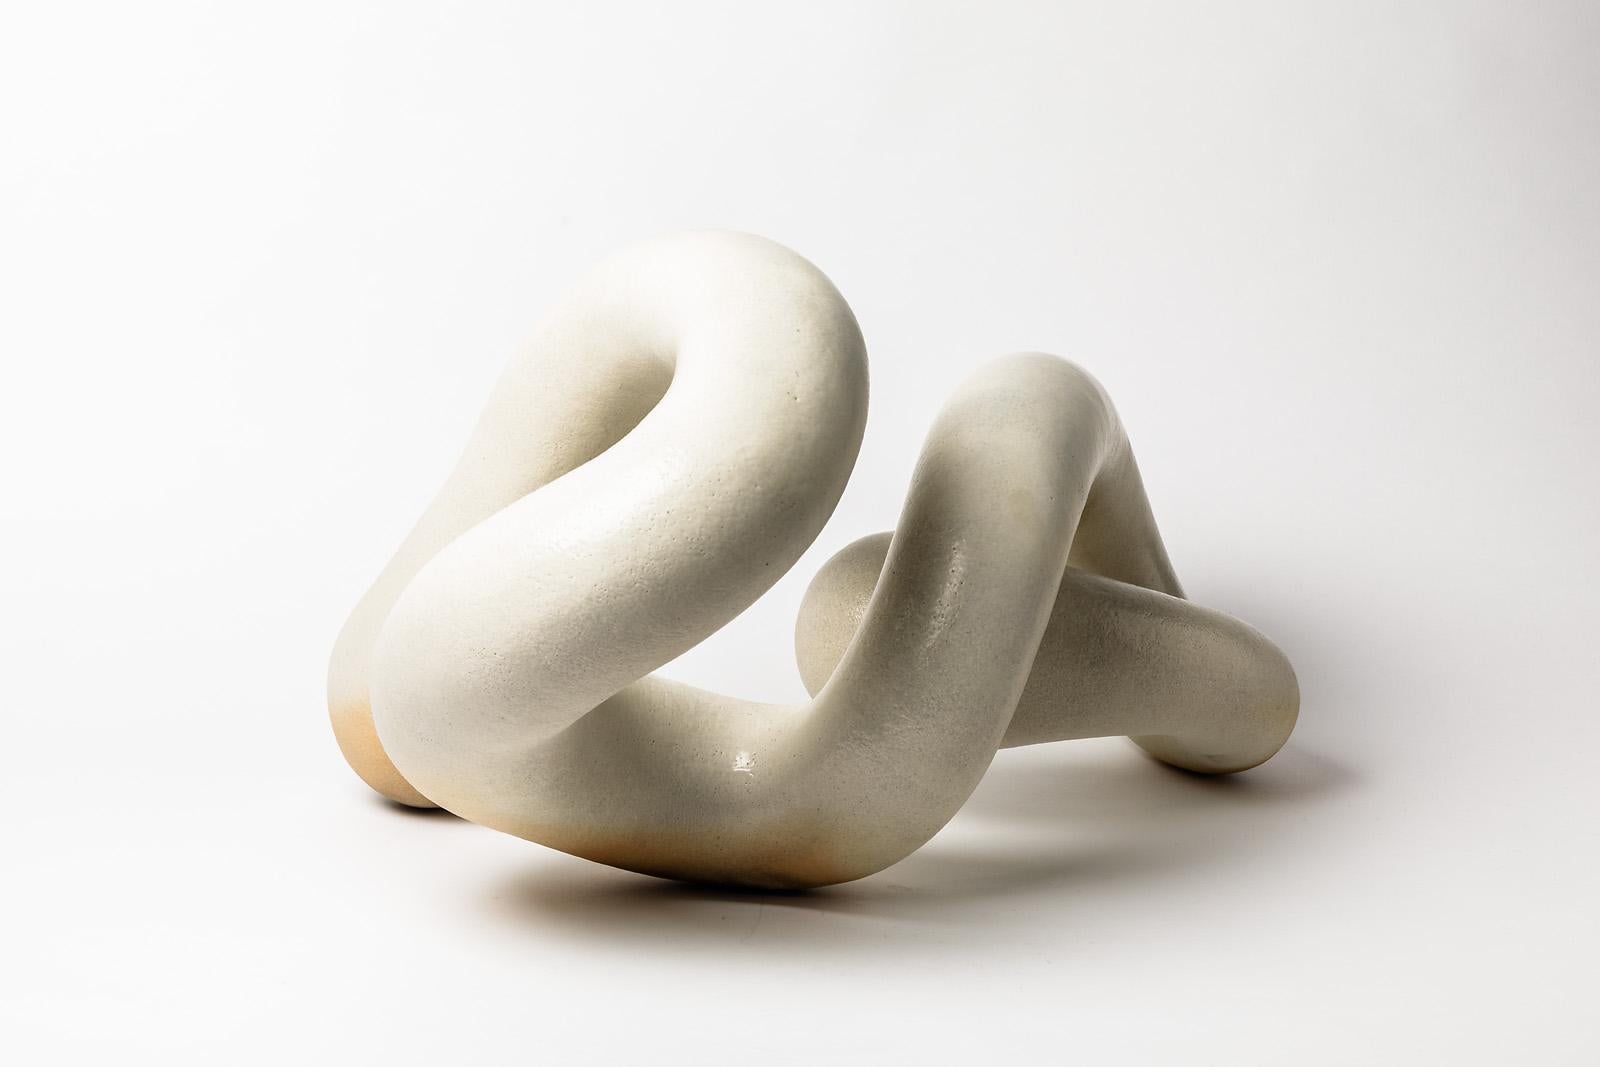 French Ceramic Sculpture by Alistair Danhieux, circa 2010